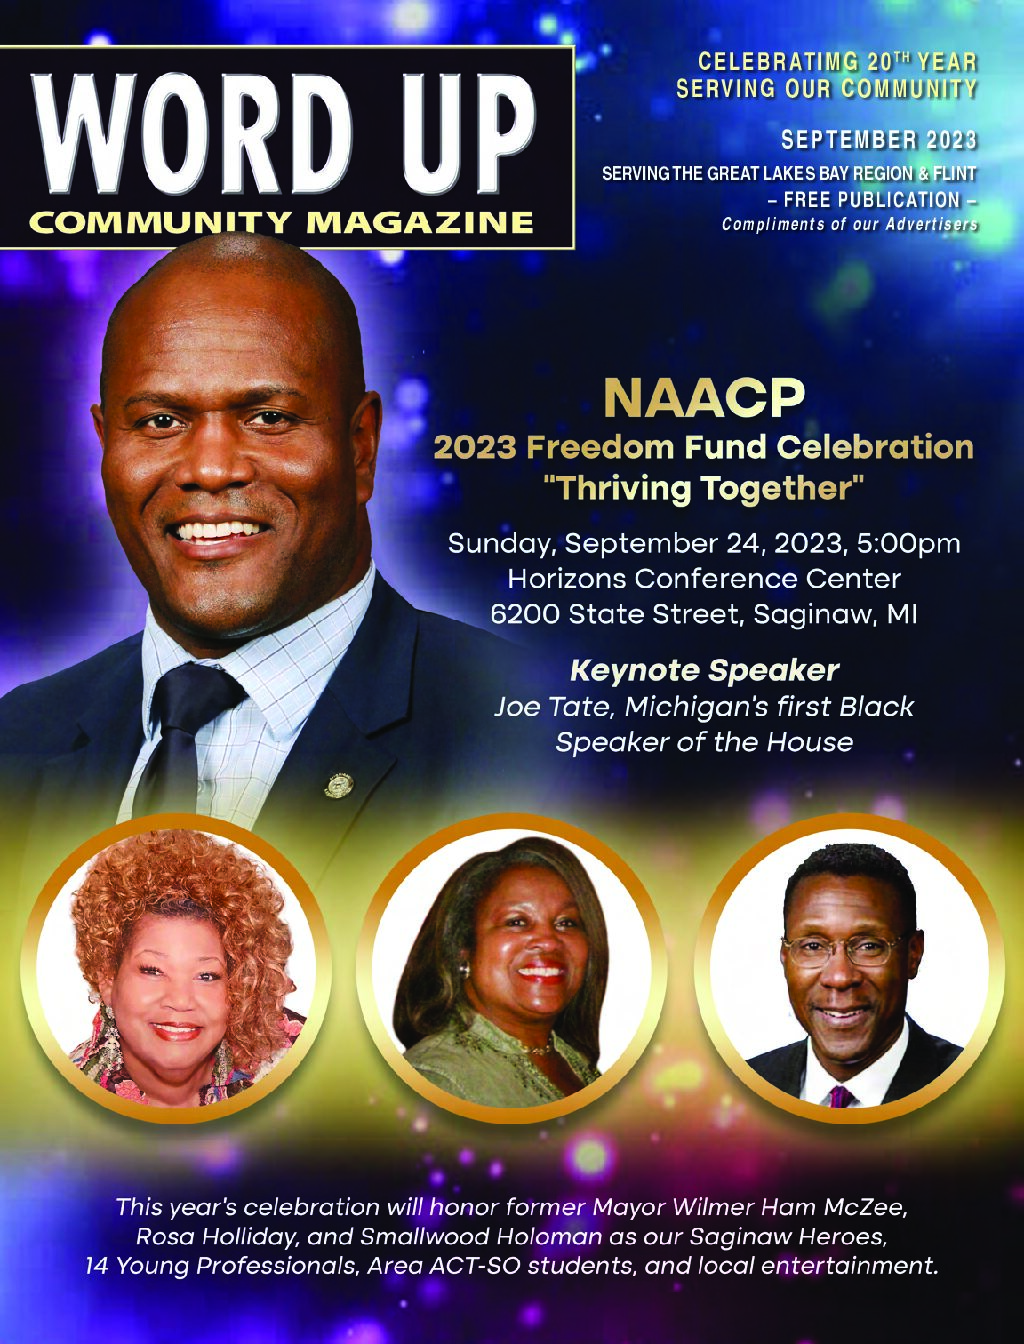 <h1 class="tribe-events-single-event-title">NAACP 2023 Freedom Fund Celebration “Thriving Together”!</h1>